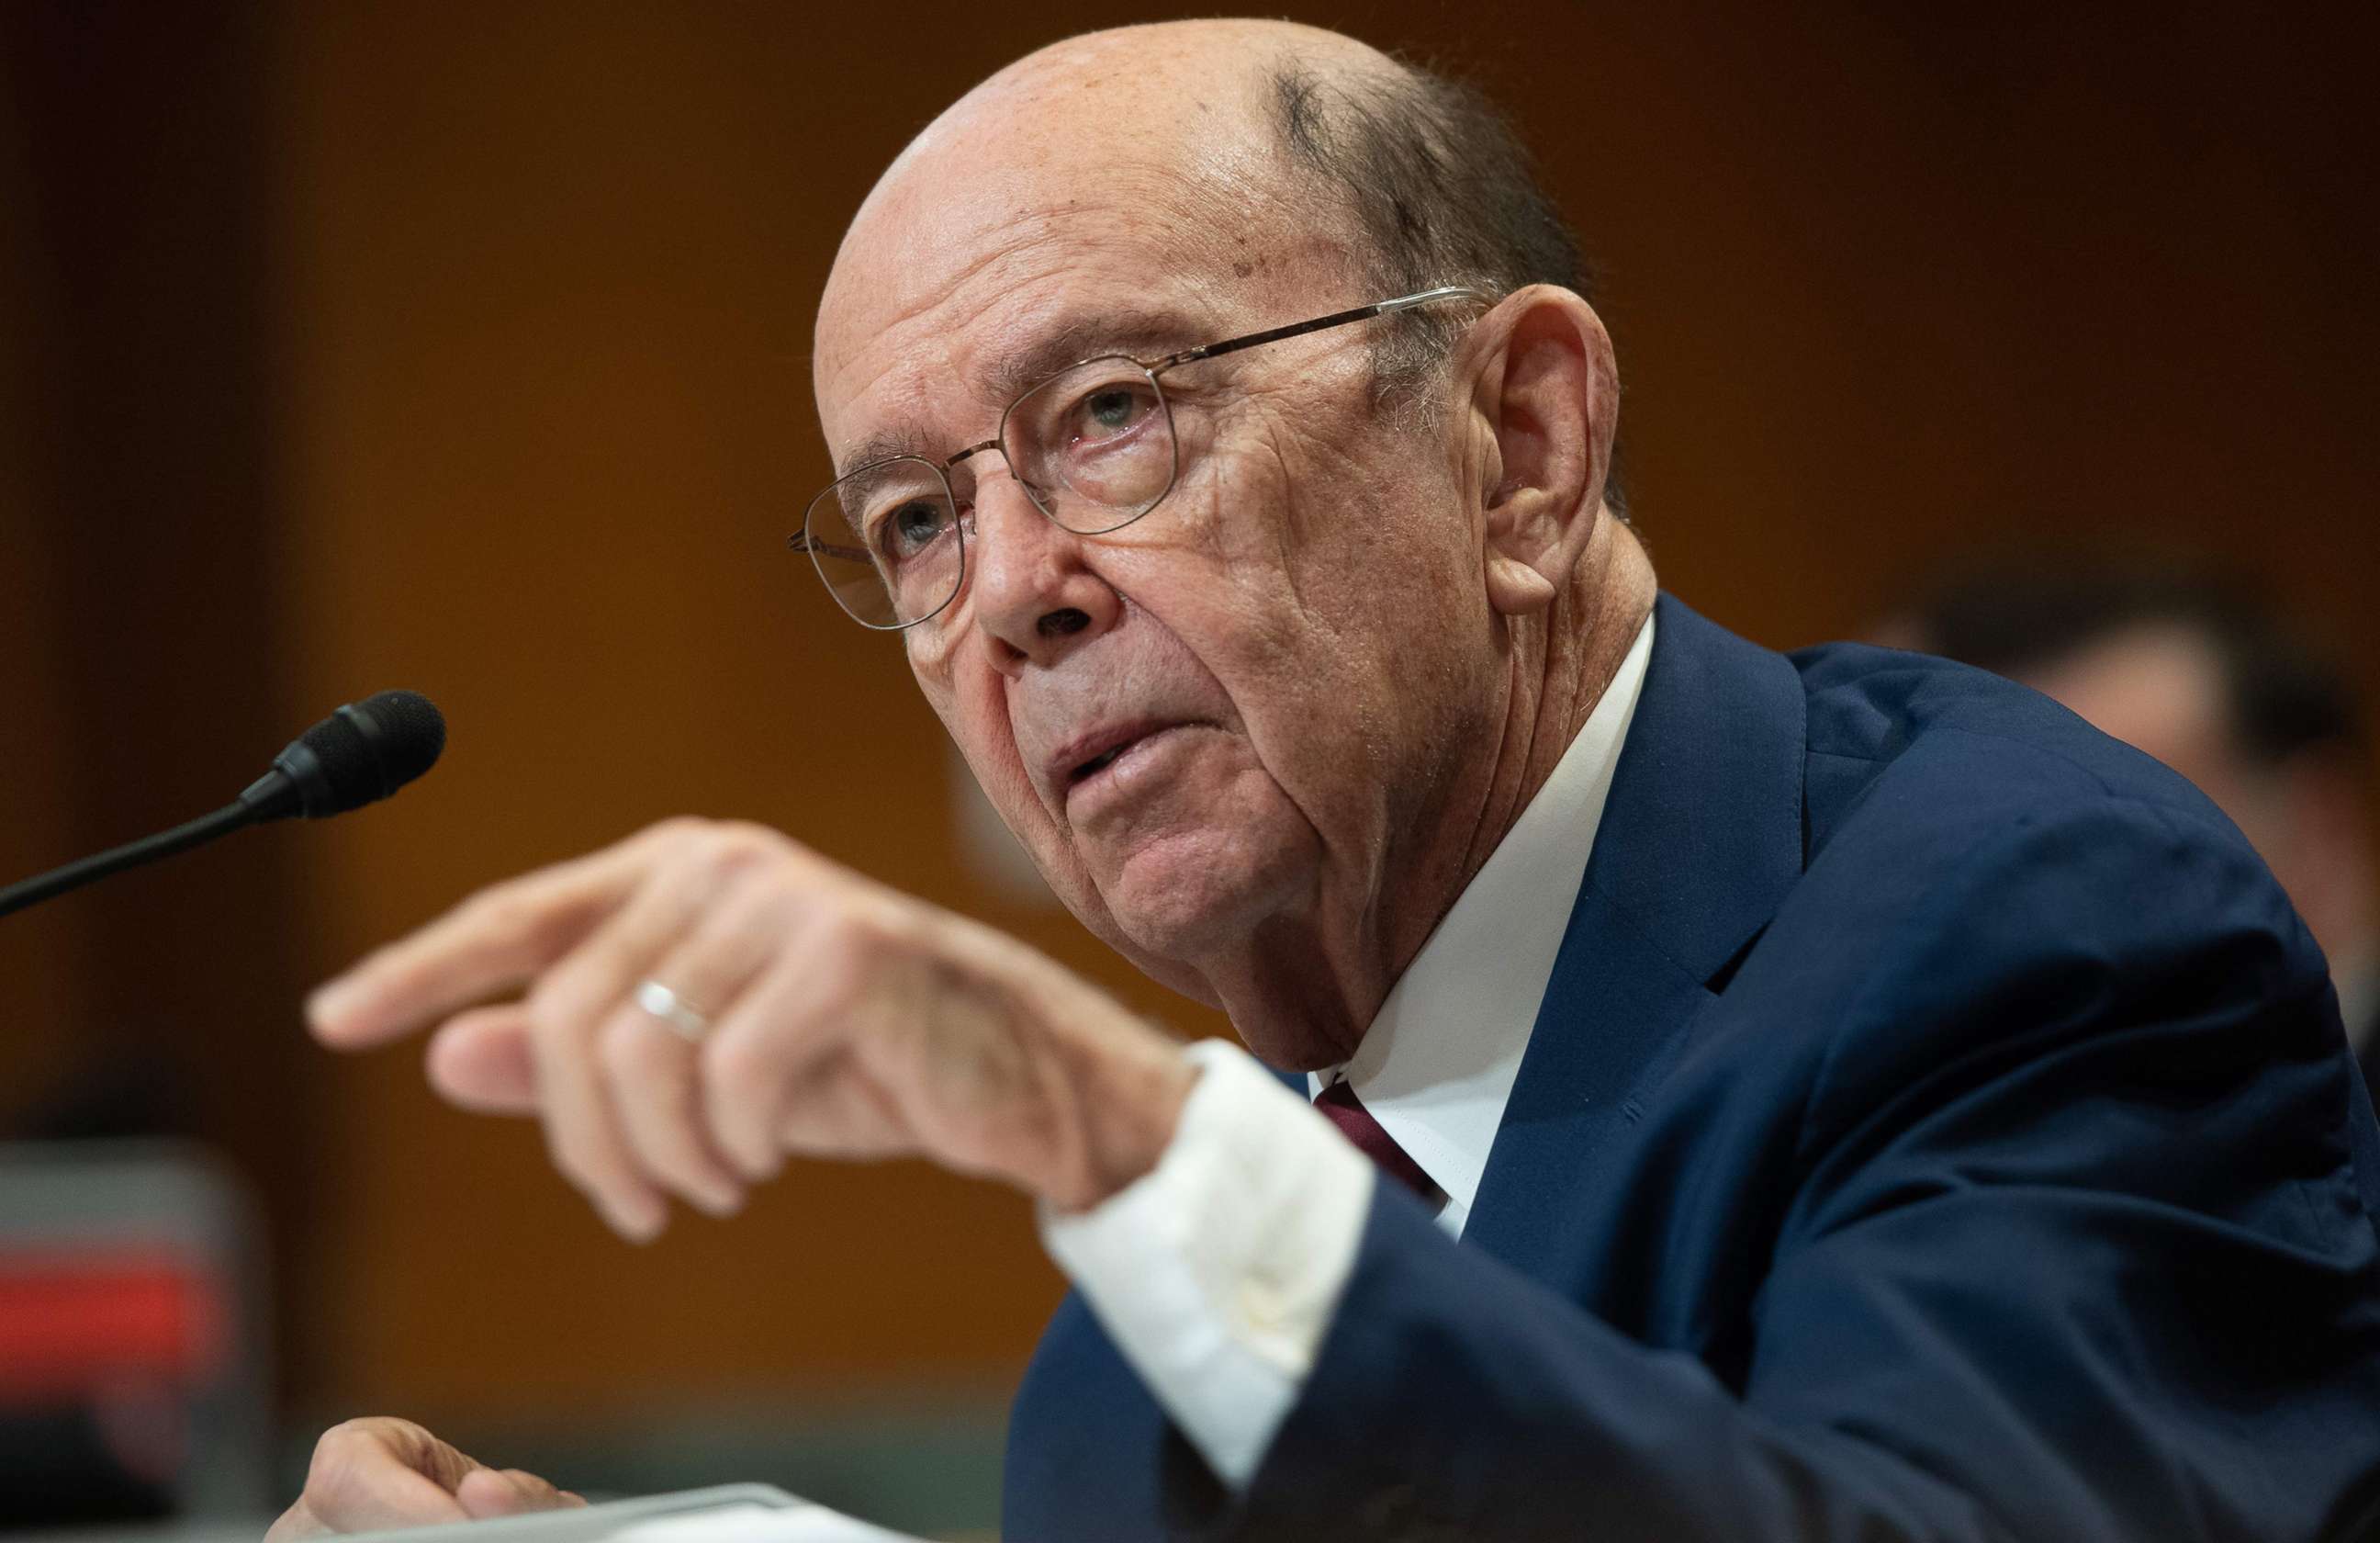 PHOTO: In this file photo taken on March 05, 2020, Secretary of Commerce Wilbur Ross testifies about the fiscal year 2021 budget during a Senate Appropriations subcommittee on Commerce, Justice, Science and Related Agencies hearing in Washington, DC.